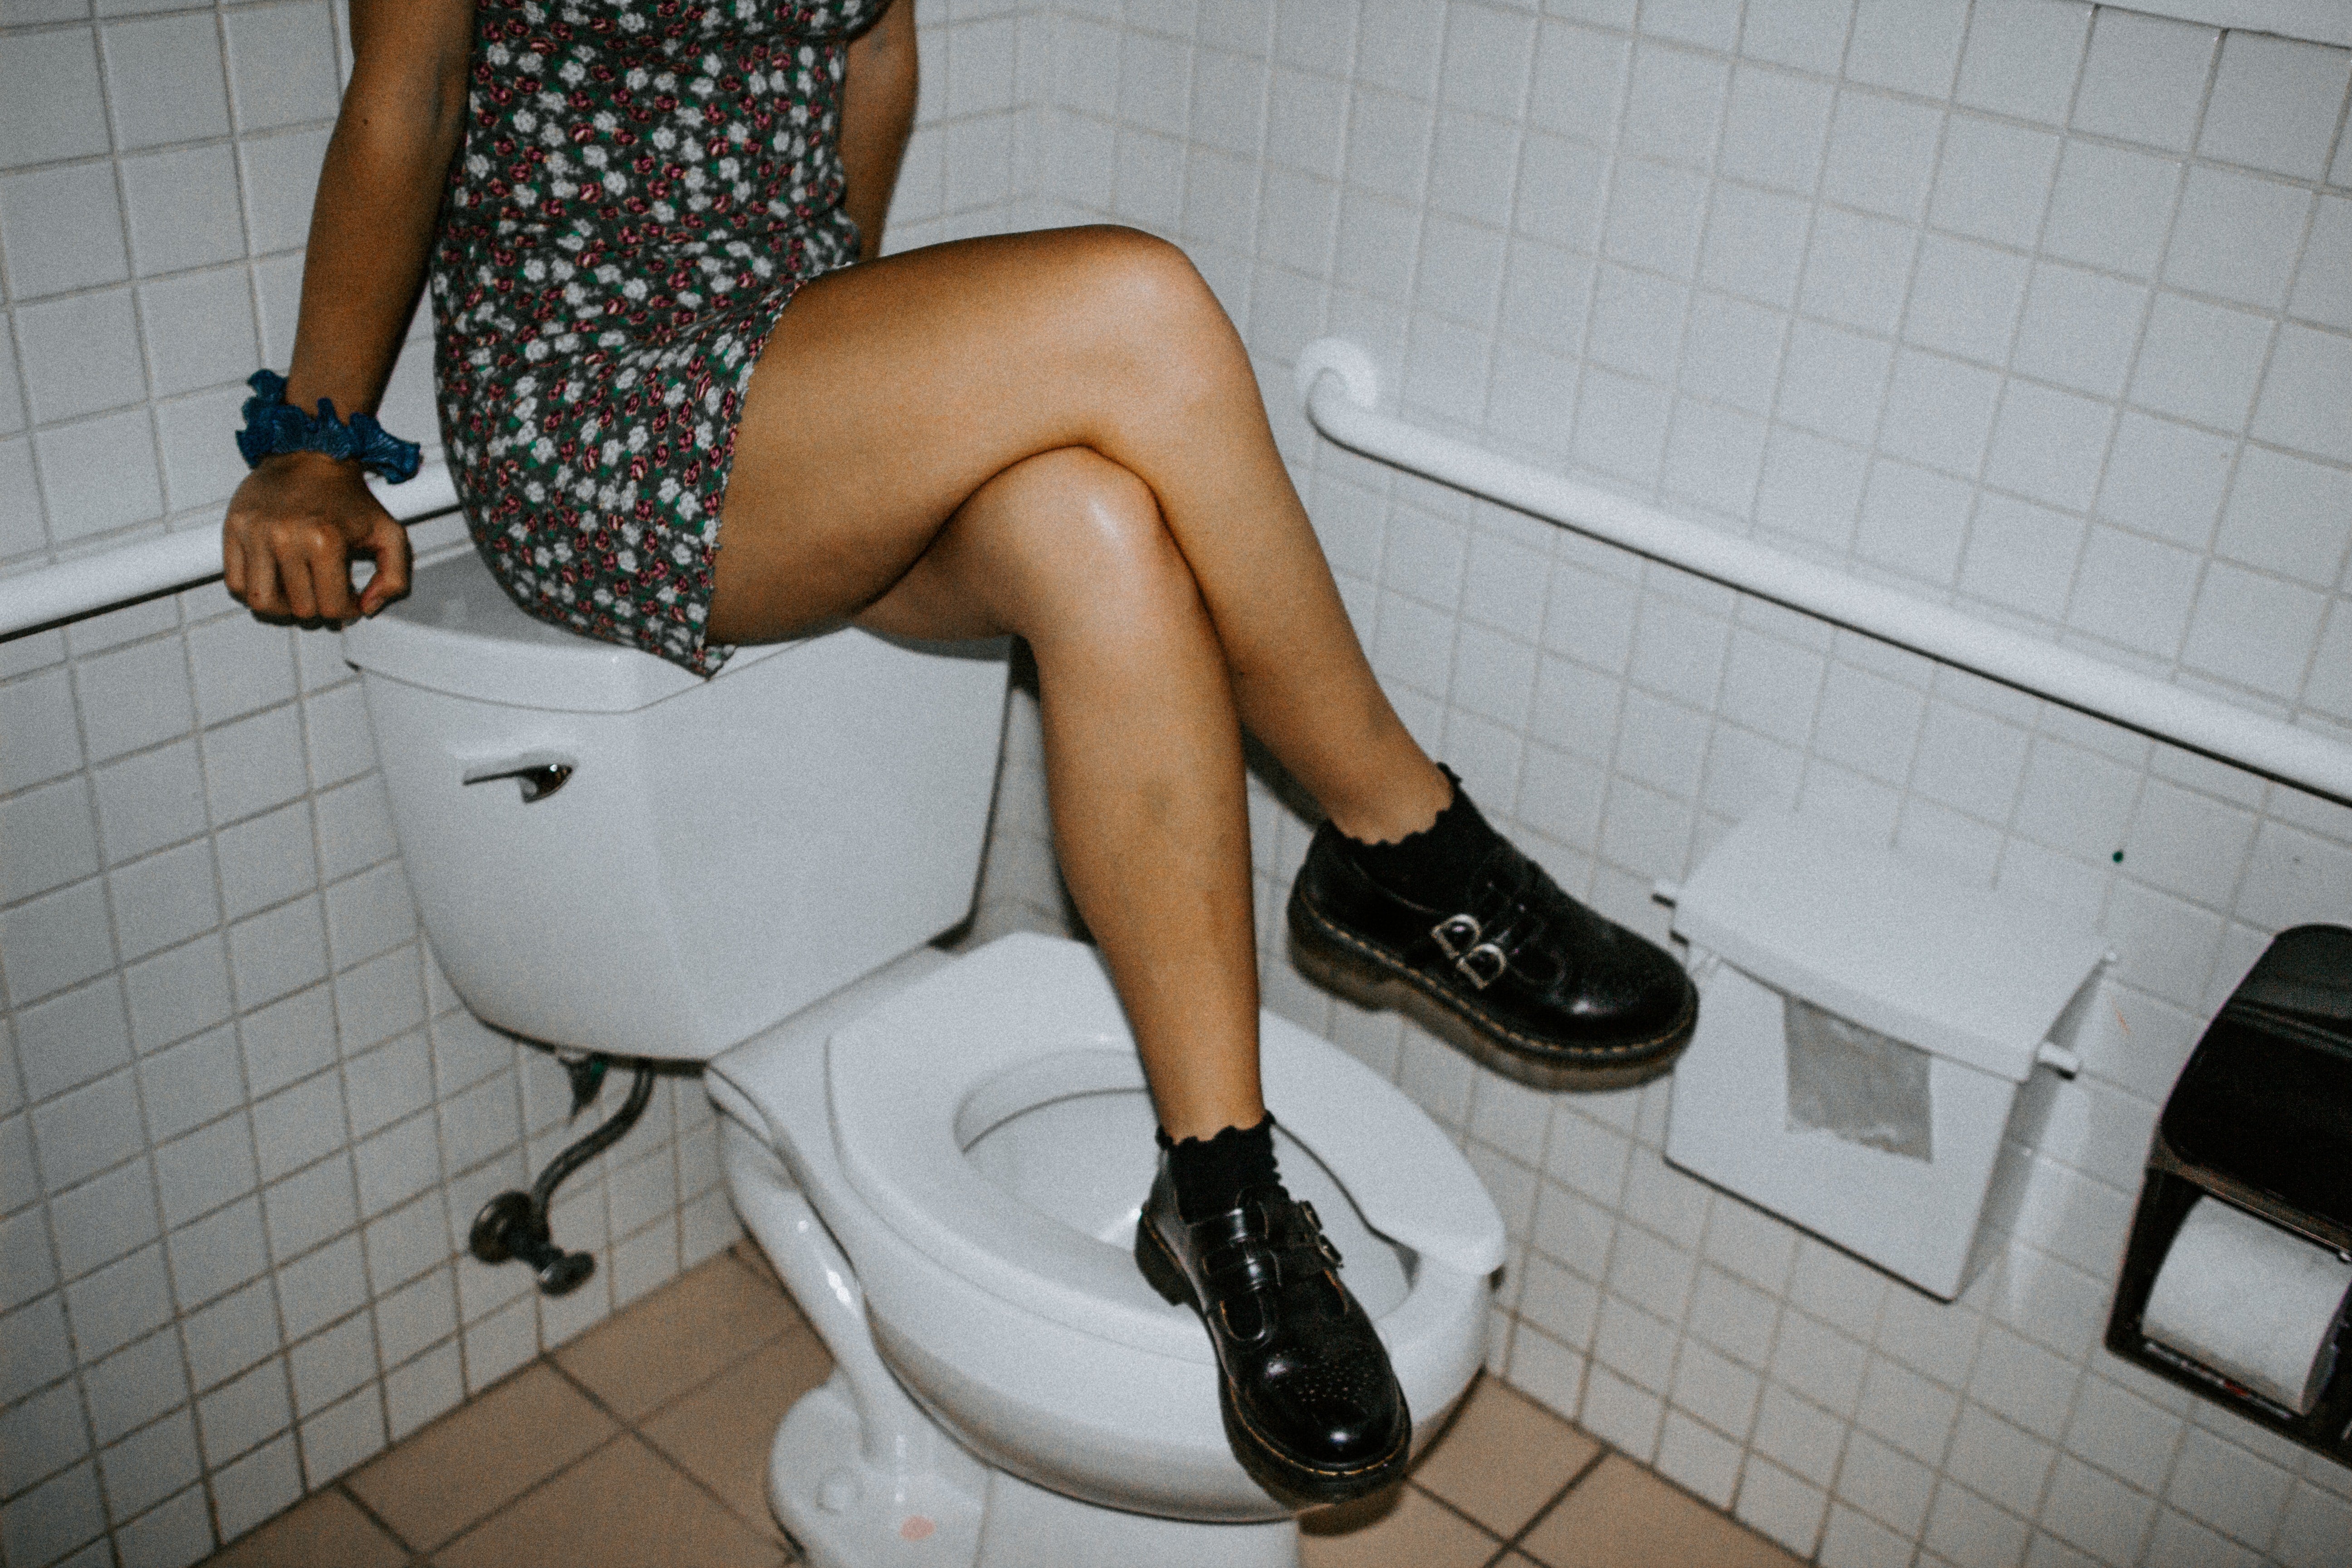 Urinary tract infections could be caused by holding your pee, a survey suggests.